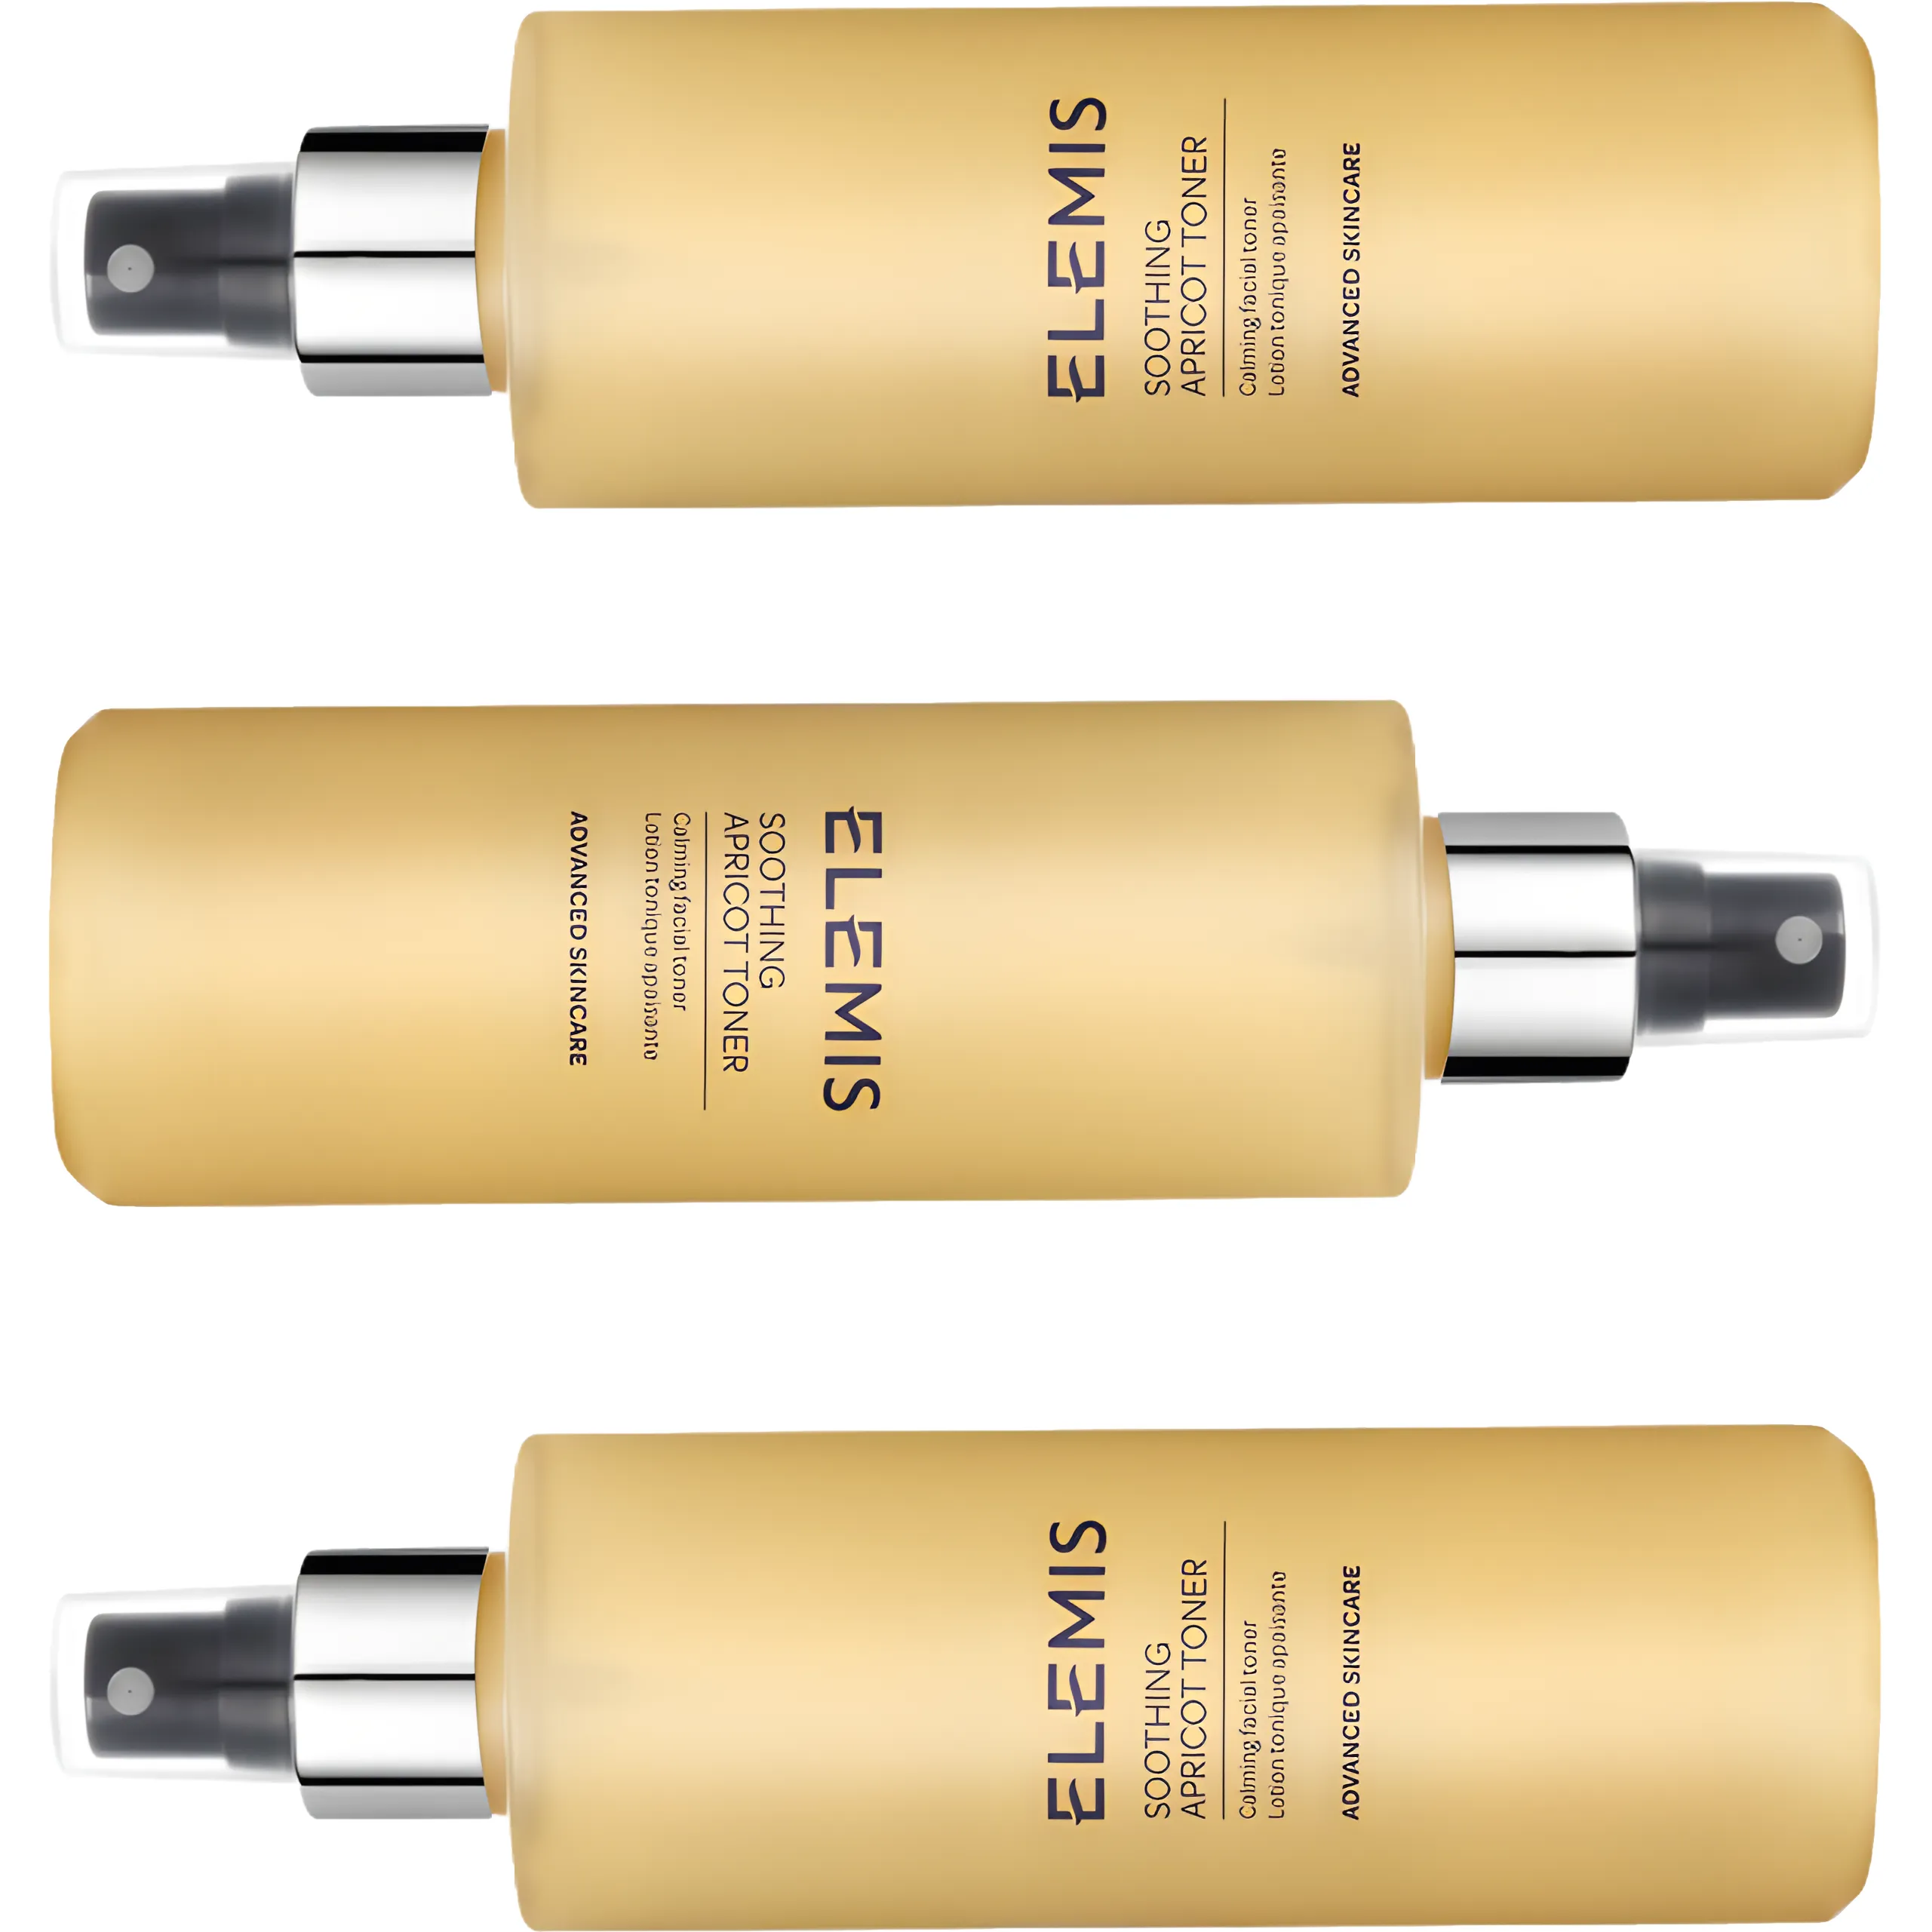 Free Elemis Skin Care Products For Insiders